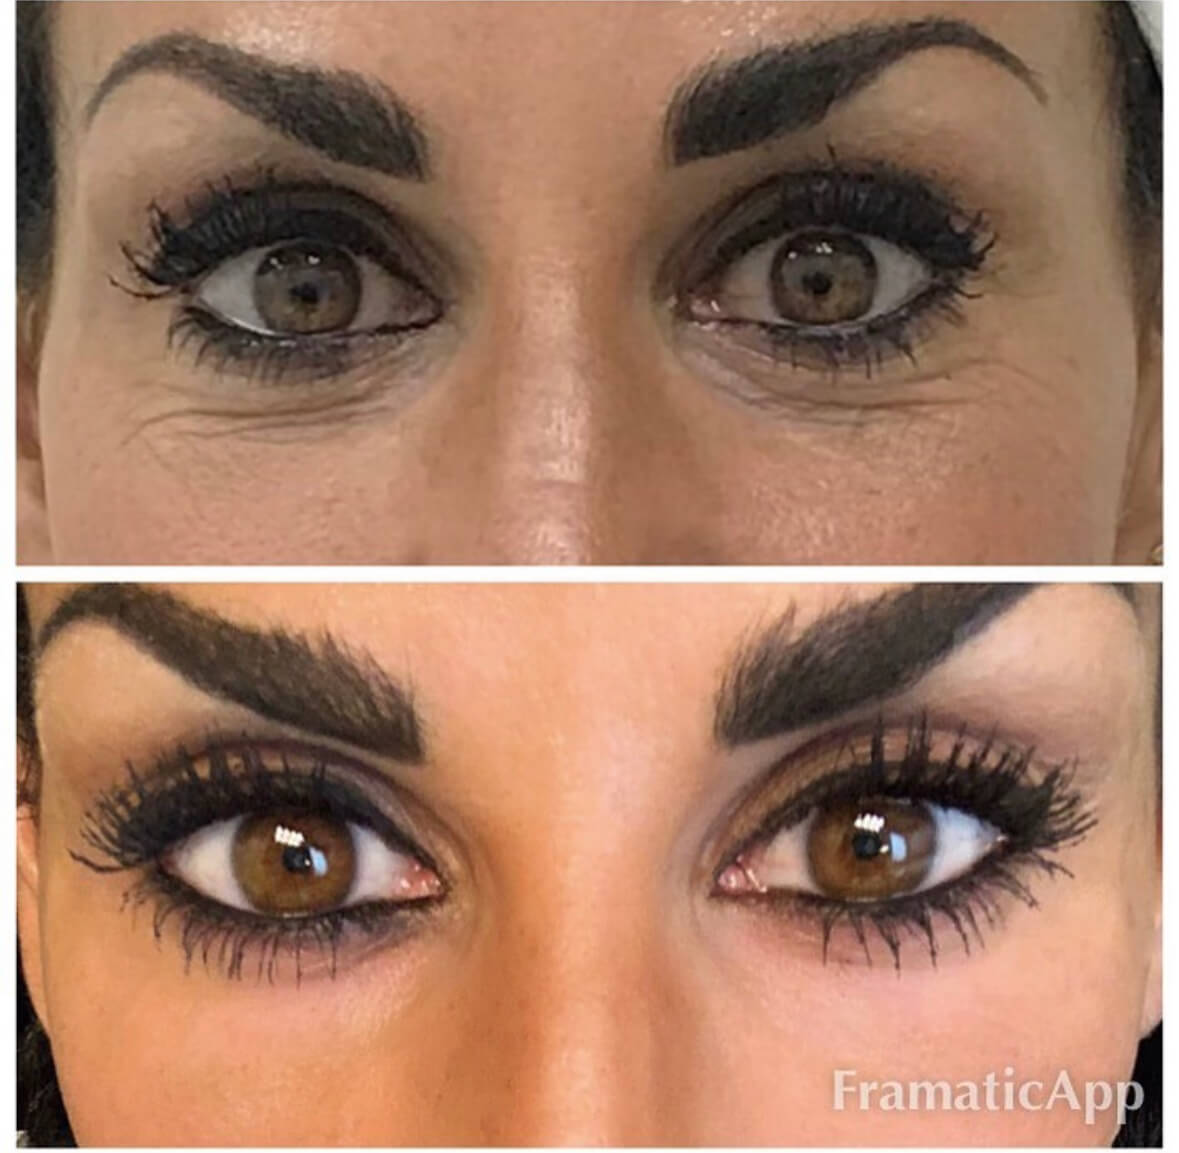 A woman’s eyes before and after receiving Juvéderm Volbella injectables treatment.